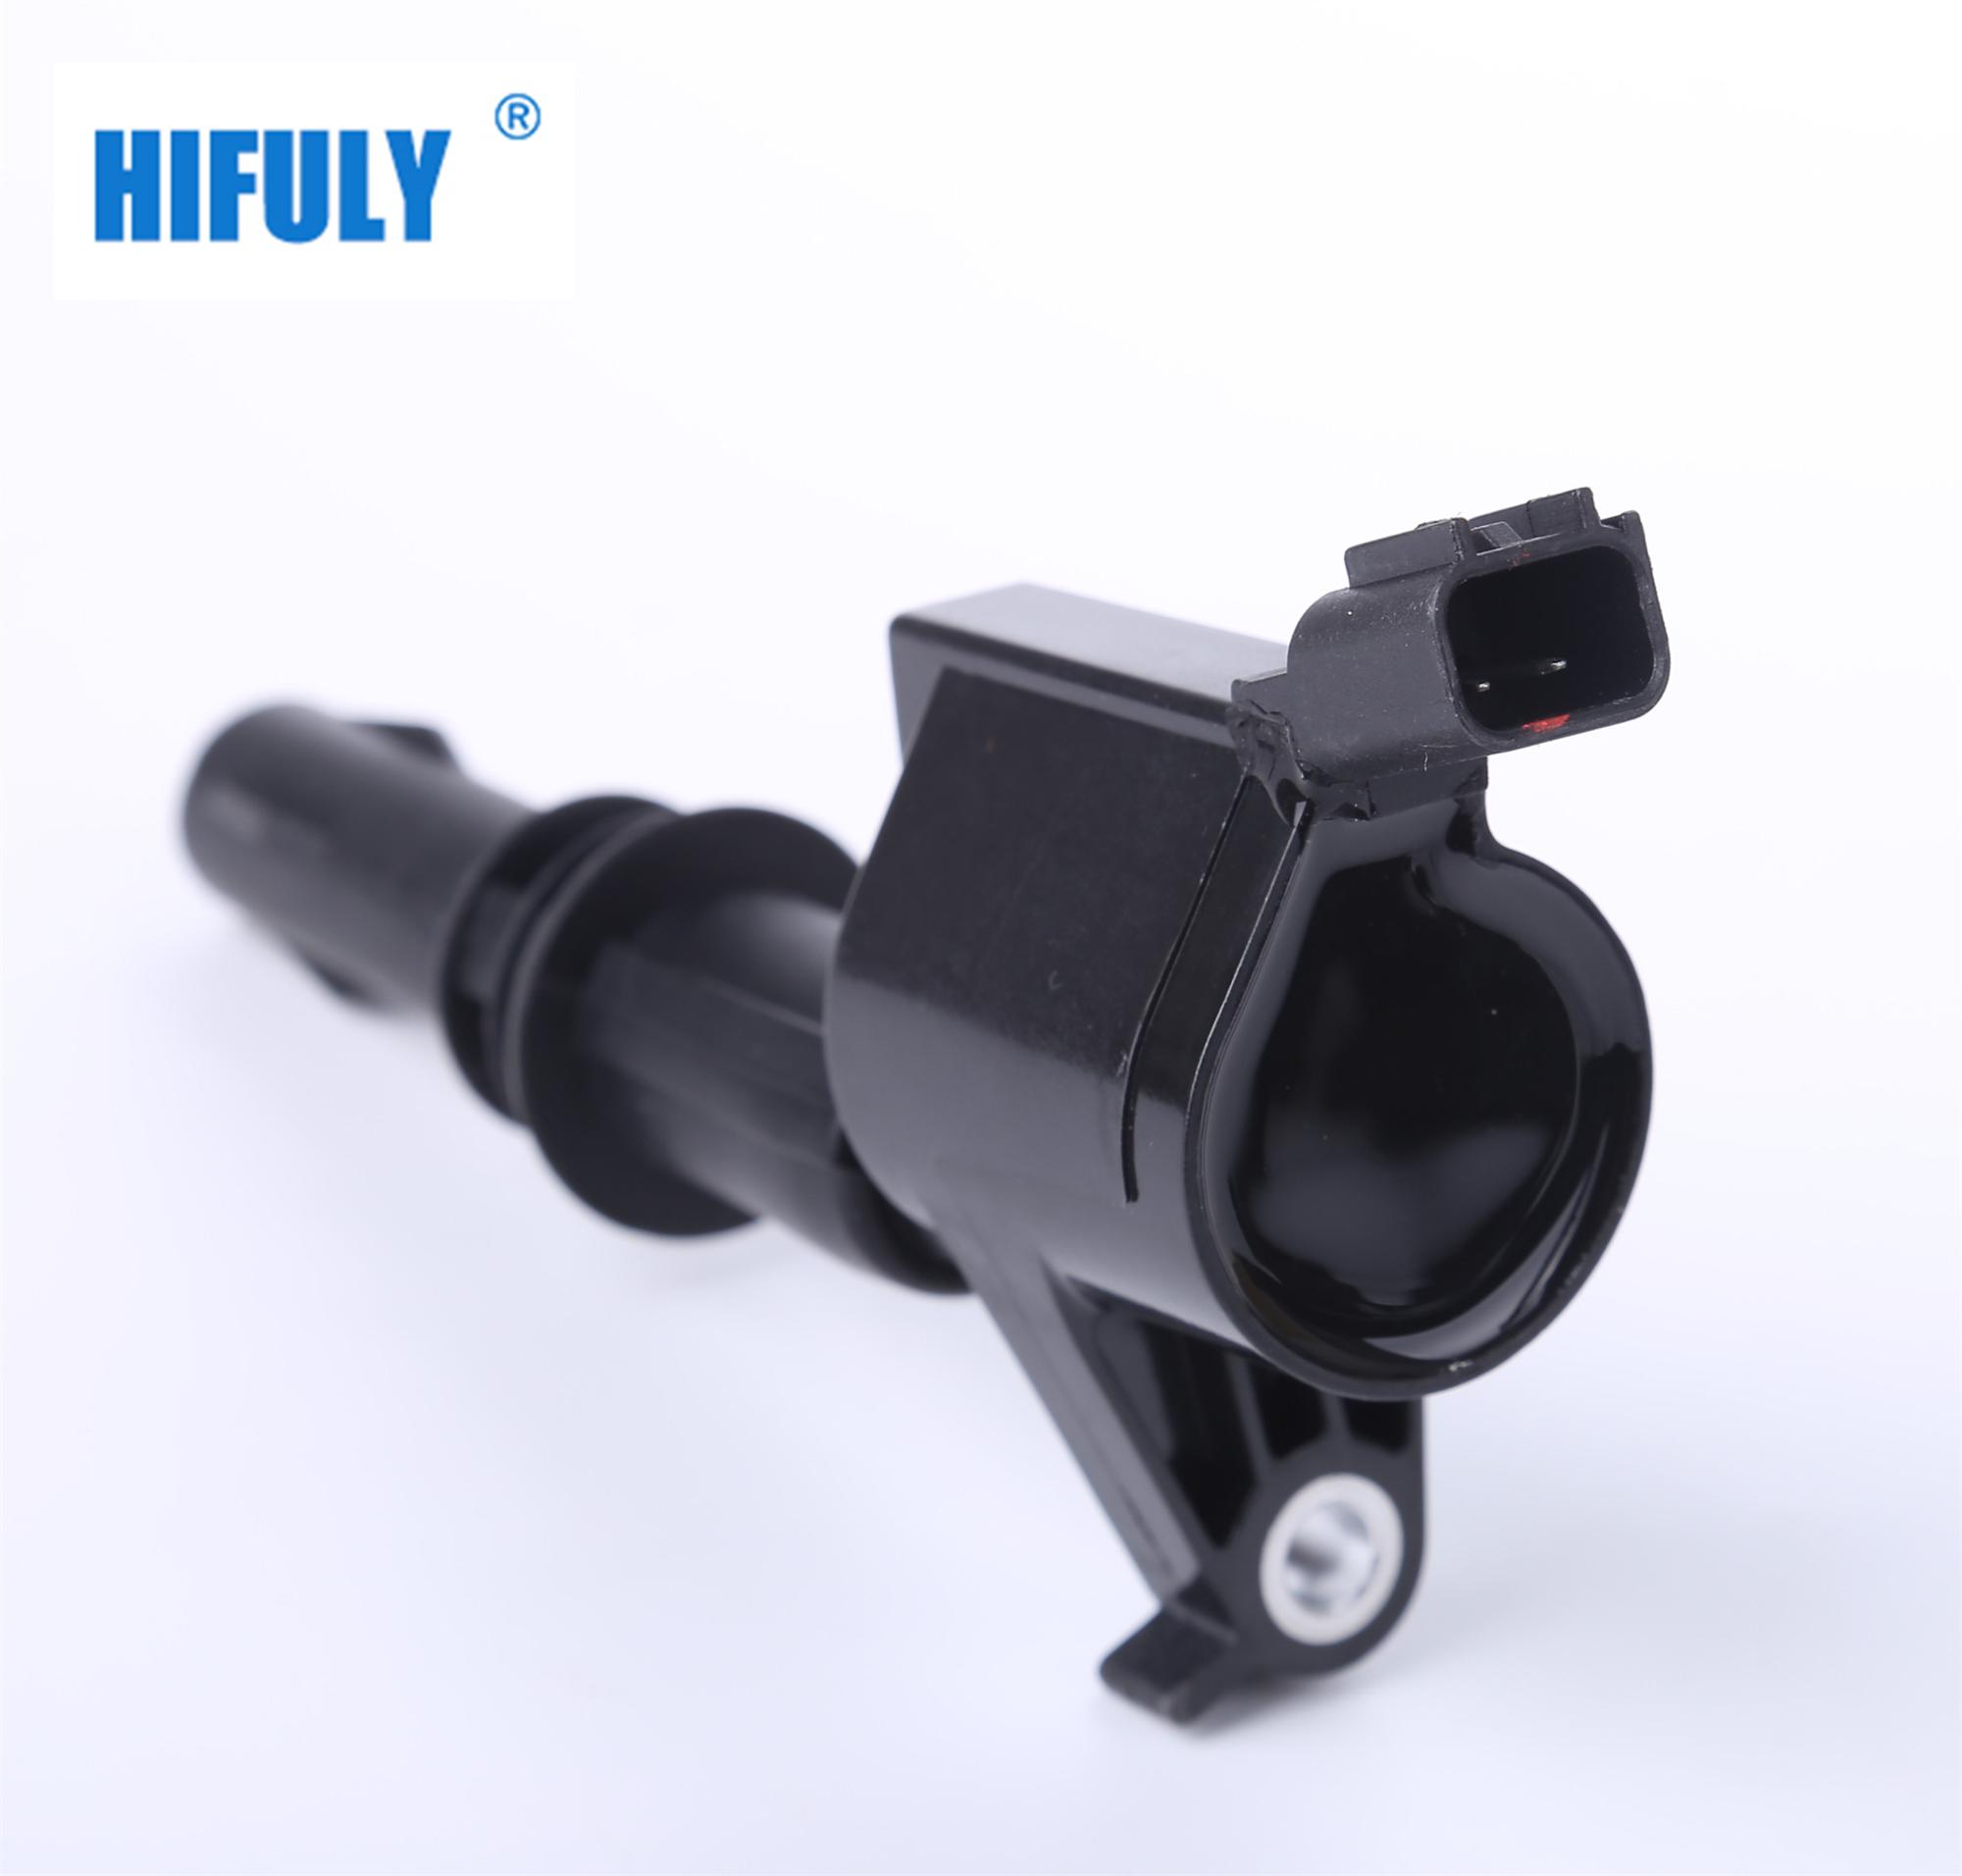 IGNITION COIL for FORD Expedition F-250 Super Duty Explorer Mustang OEM 8L3E-12A366-AA 0B244206 DG521 8L3Z-12029-A